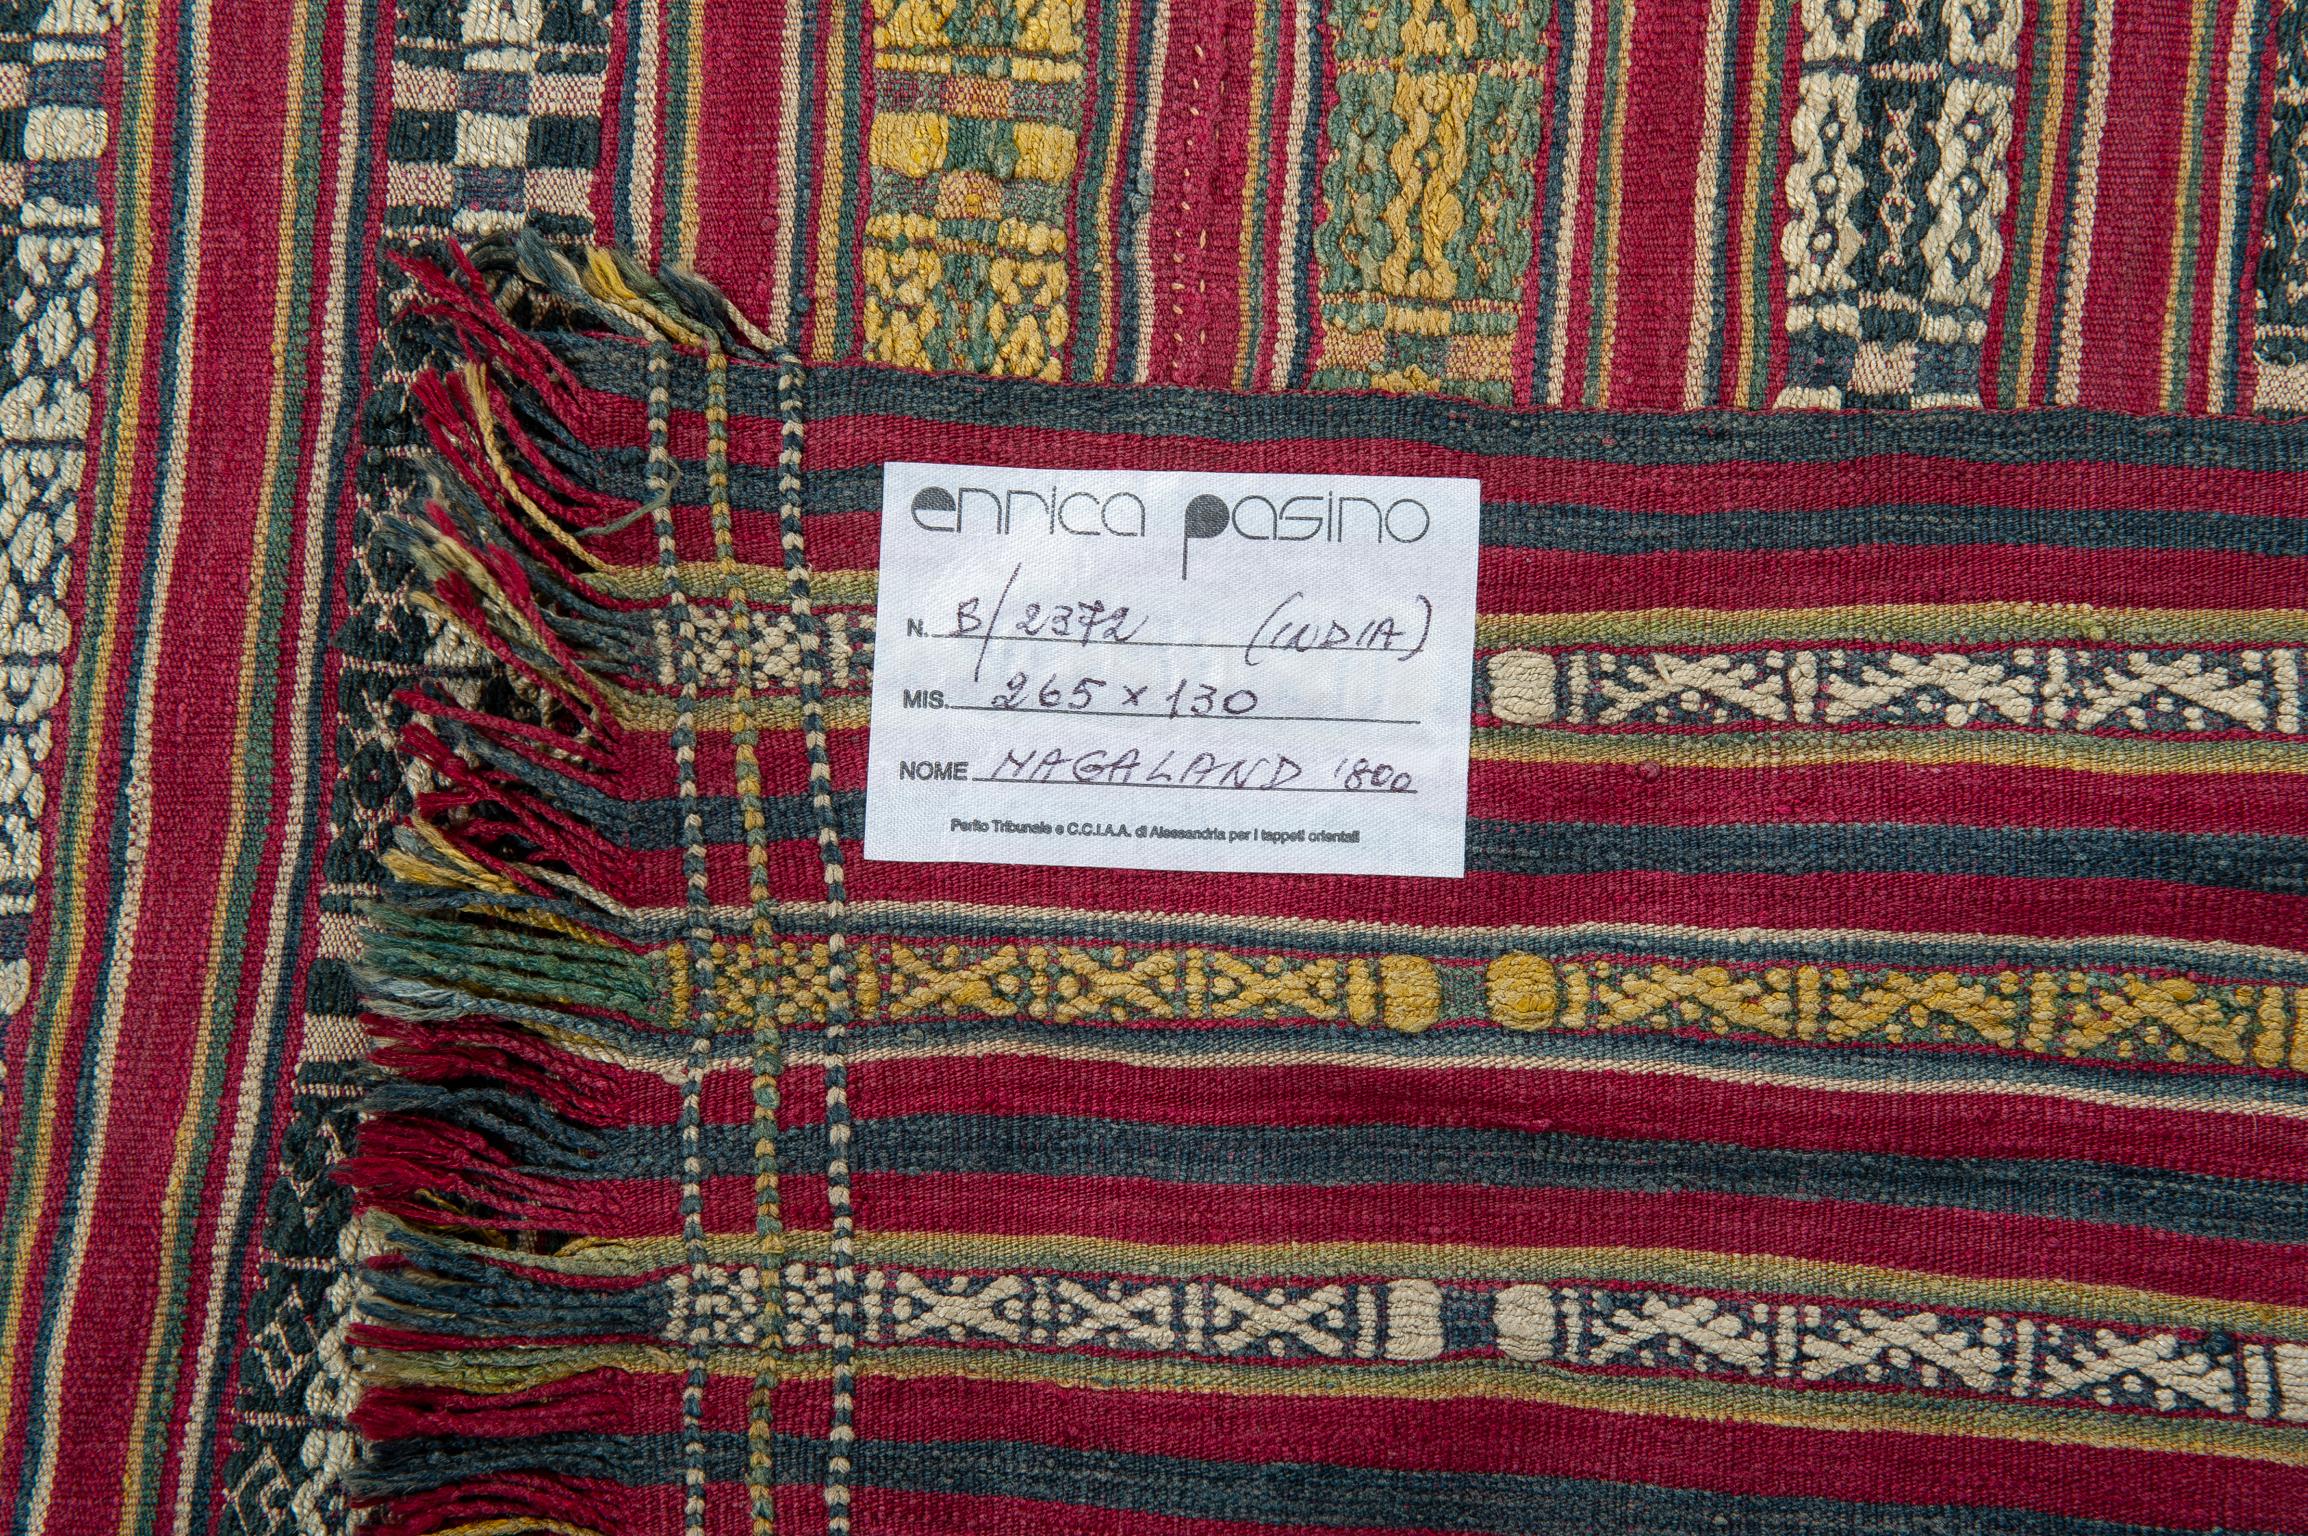 B/2372 - Antique Indian shawl from Nagaland (India) - Nagaland is one of the smaller States in India and all nearly  is mountainous. This shawl is antique, from '800, and can be worn or placed on a table. NOW with an interesting price !